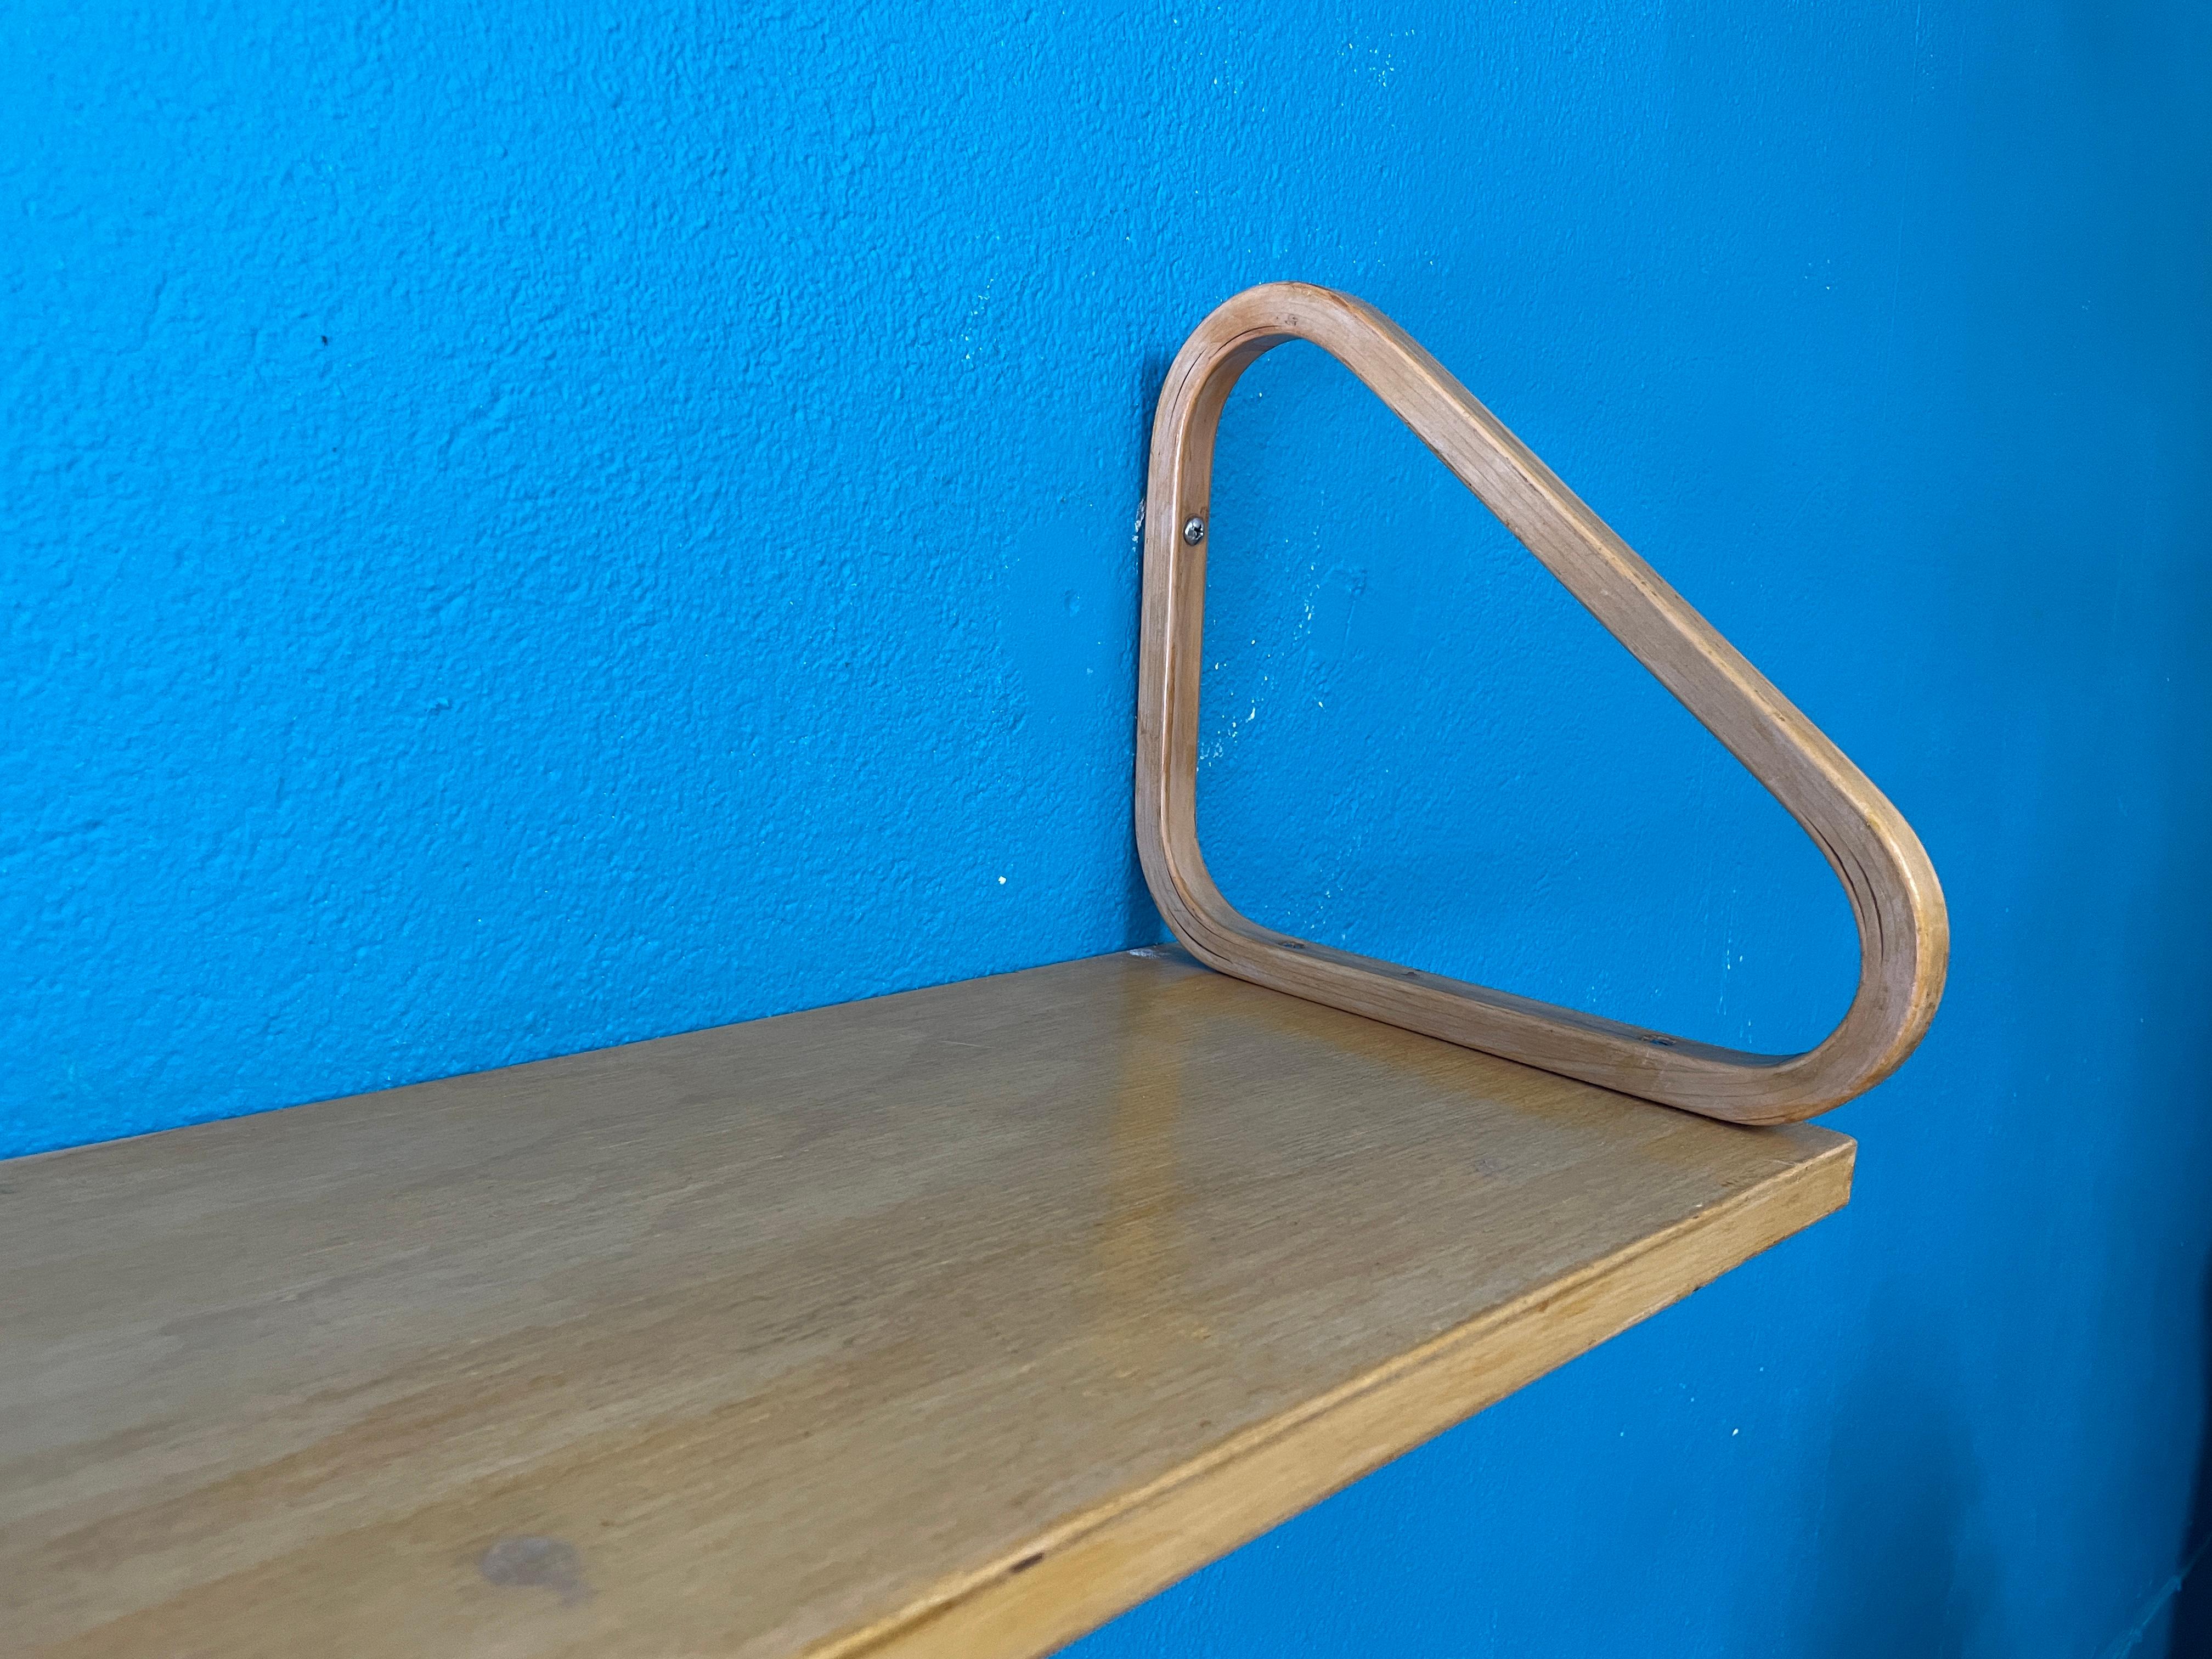 Artek's wall shelf 112B is an elegant and practical shelf that can be used for books, decorative lamps or small items. Alvar Aalto designed the wall shelf 112 in 1936.

This one was made in the 1950s and it has finger-joint construction and